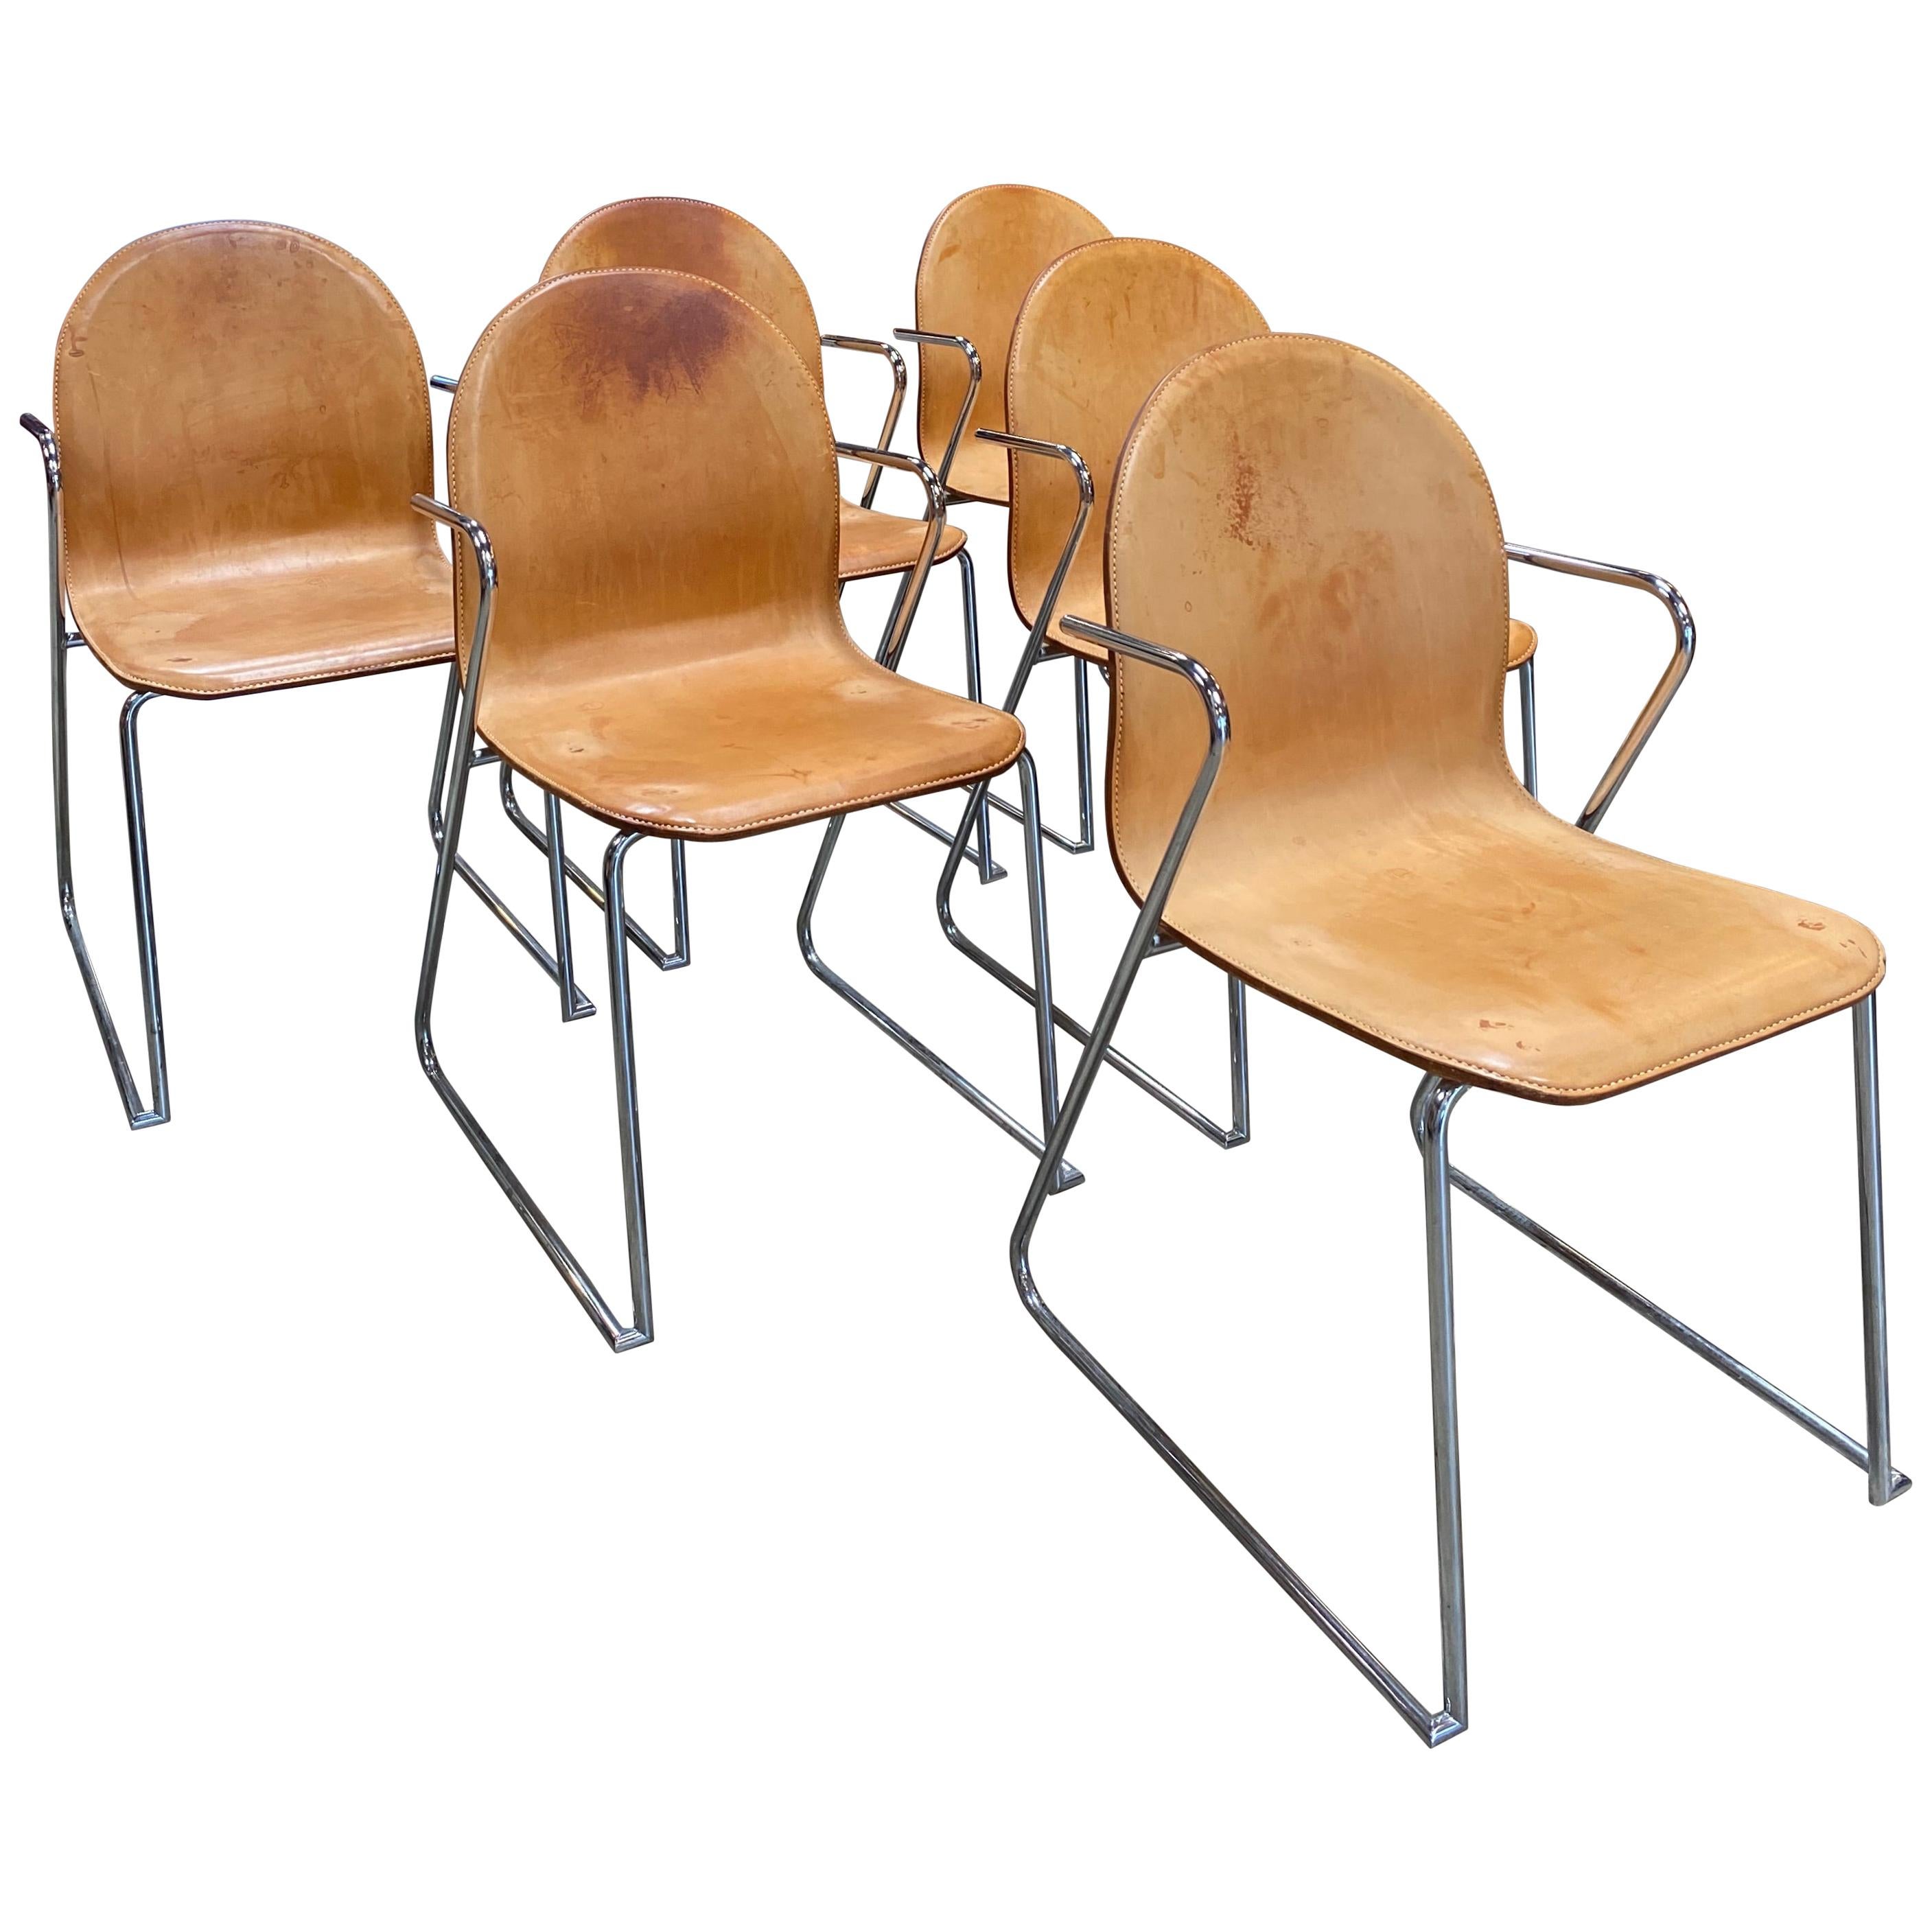 1960s Midcentury Italian Set of 6 Leather and Chrome Chairs